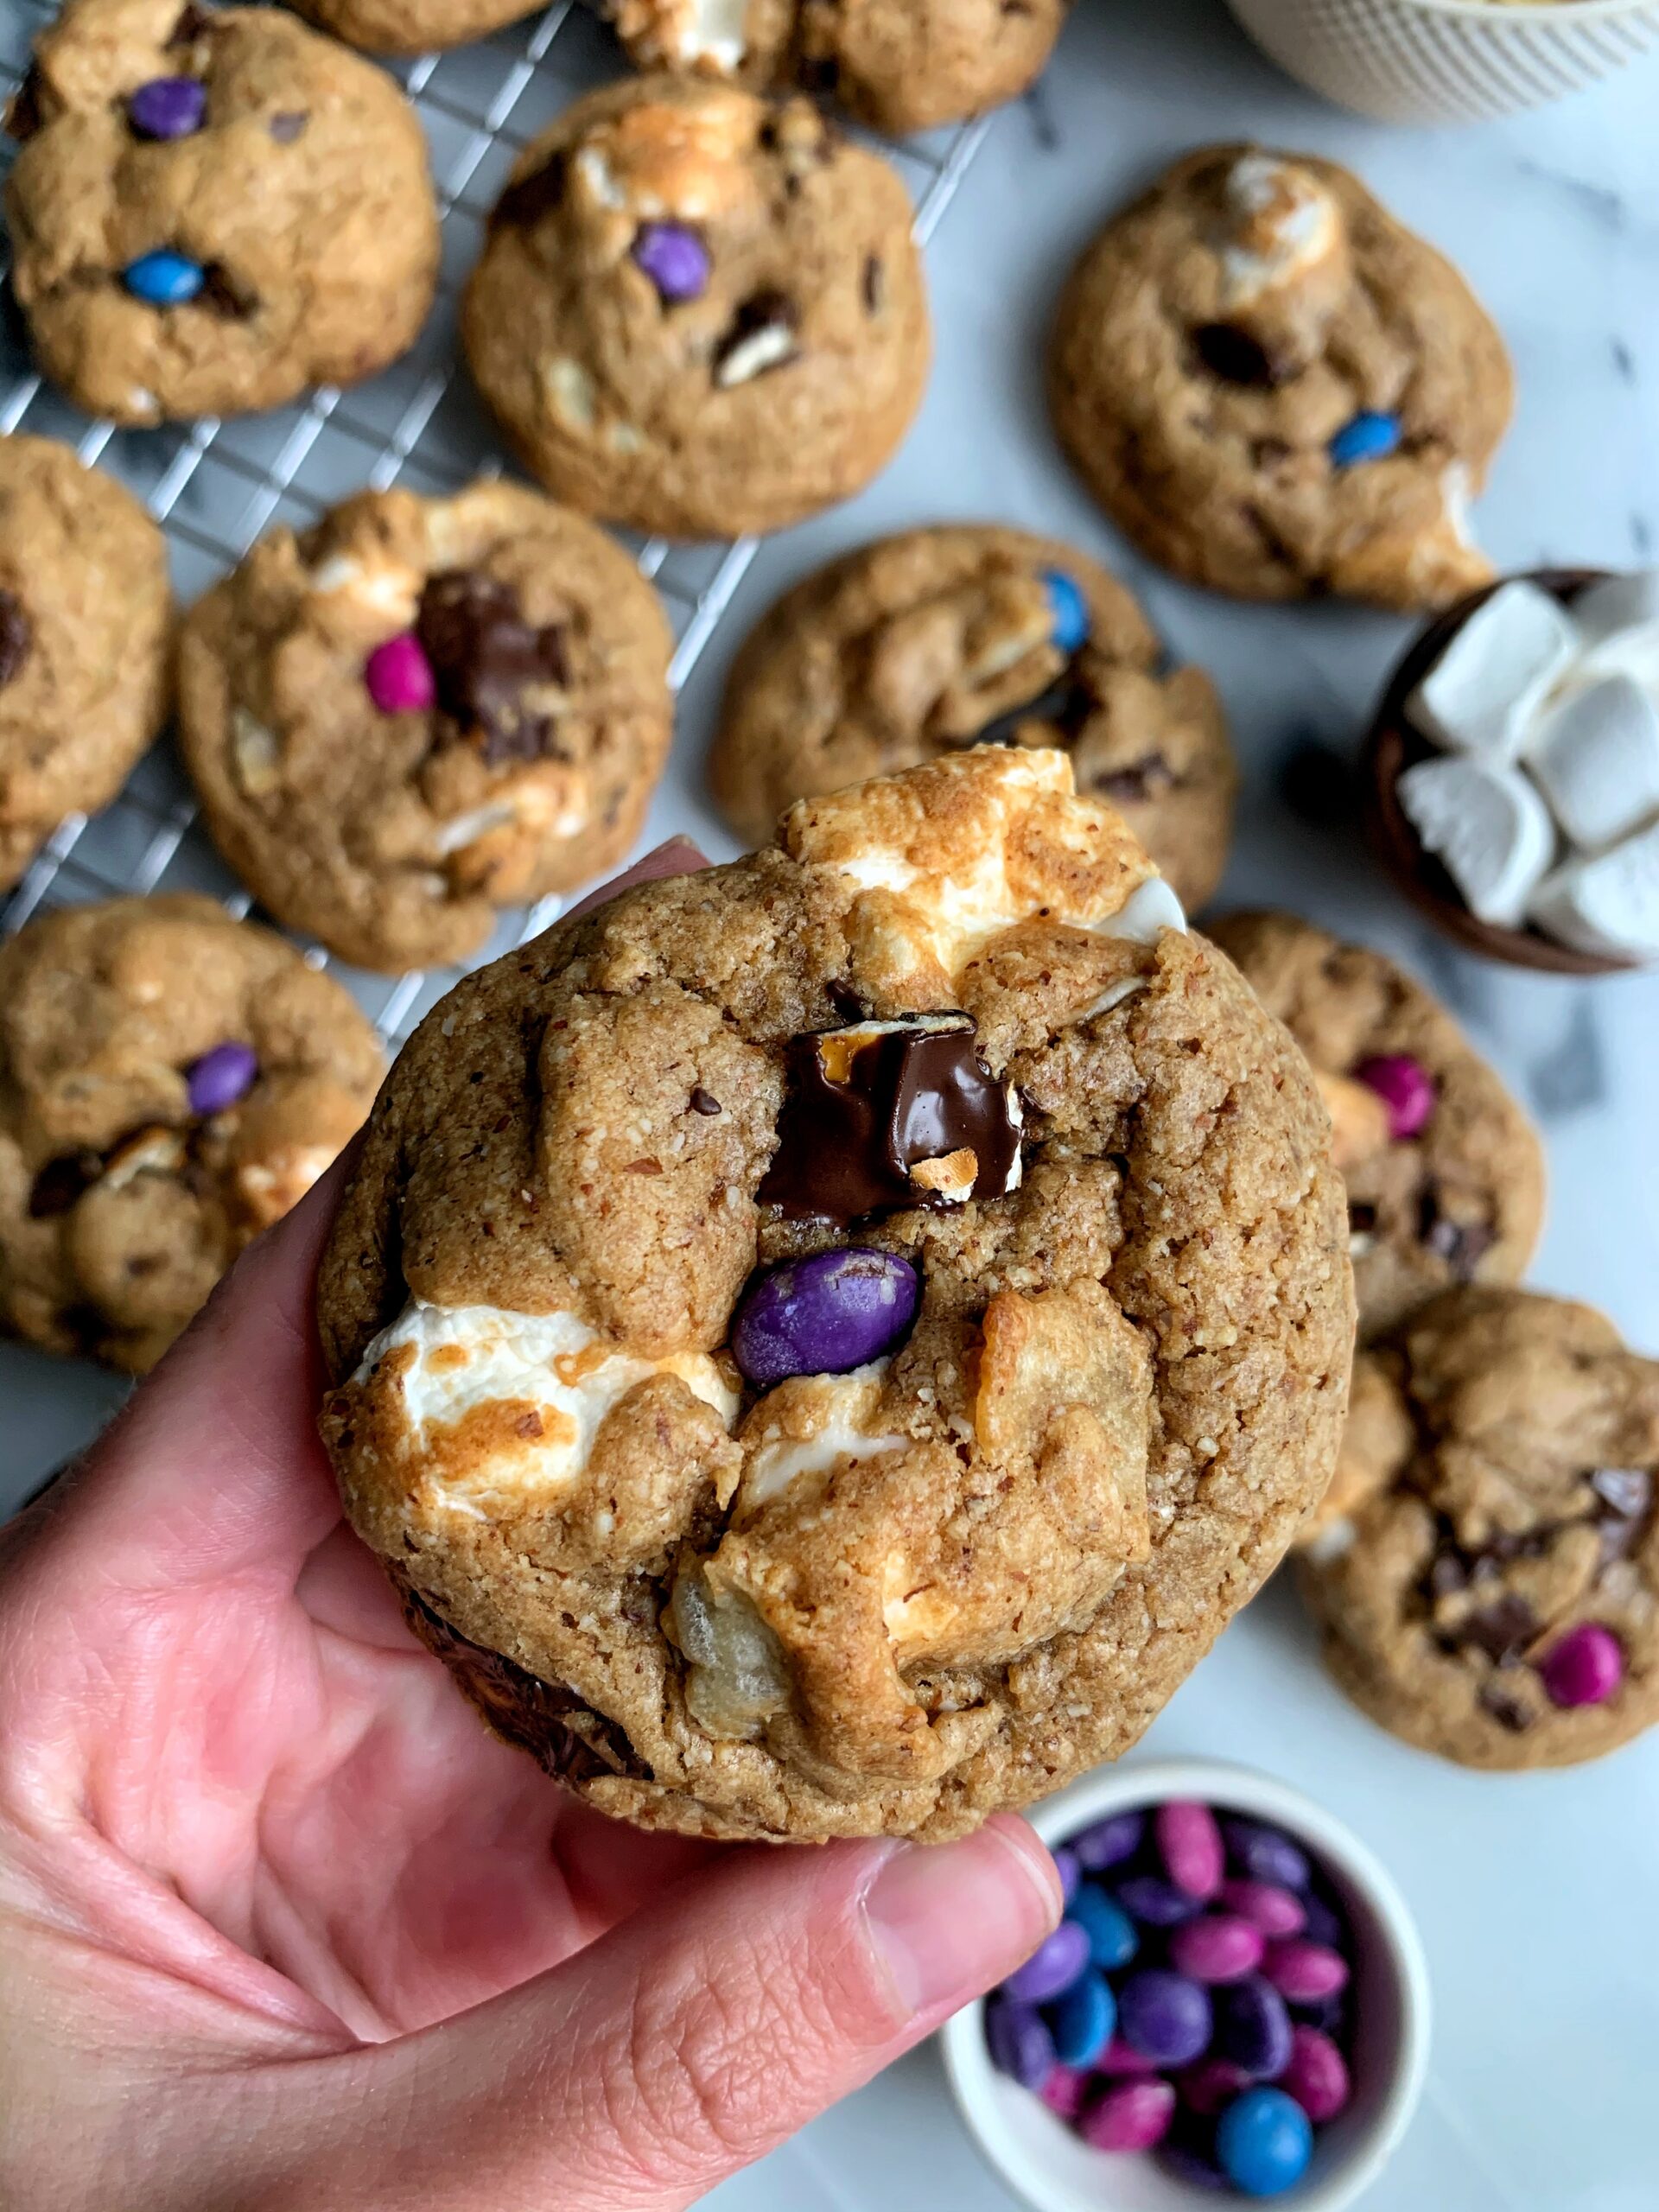 The BEST Cookie Recipes to Bake This Holiday Season! - rachLmansfield